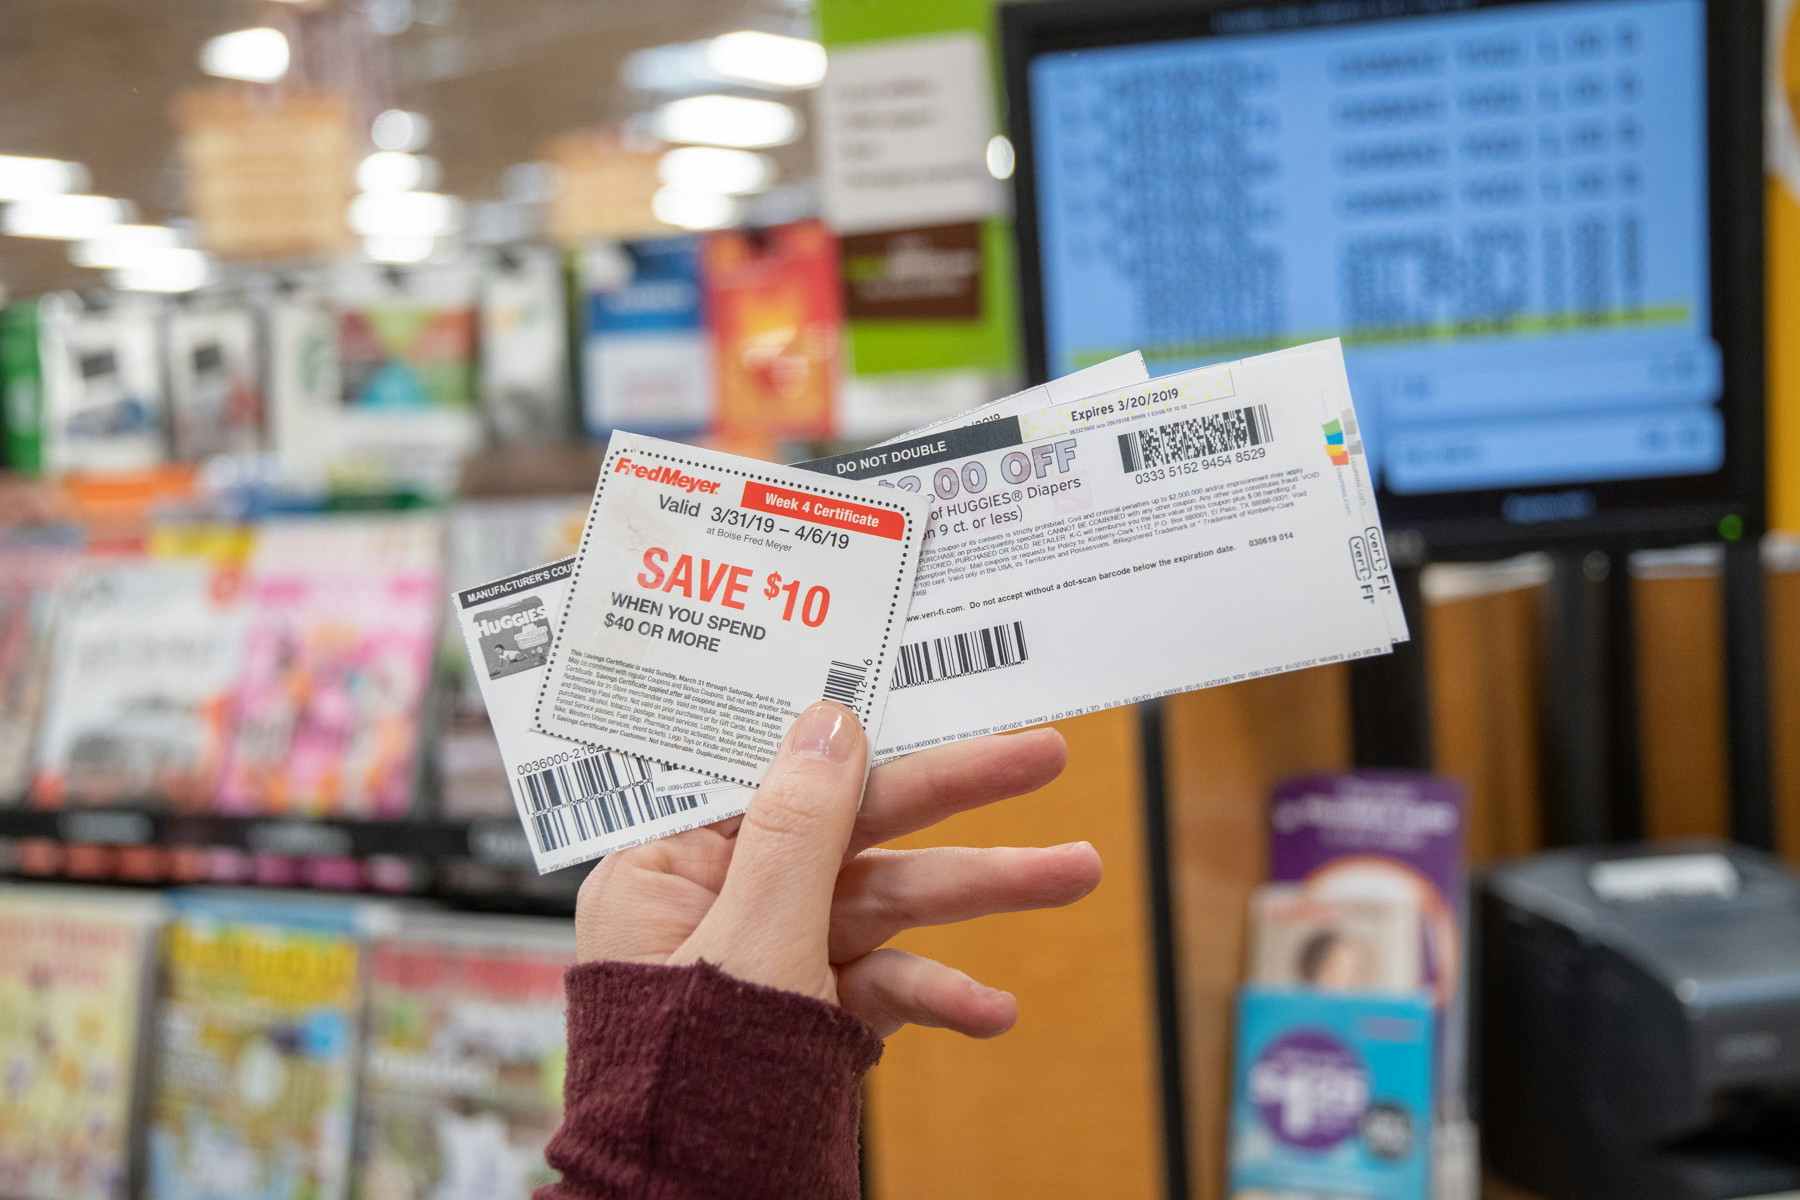 A person holding up printed coupons in front of a checkout register.